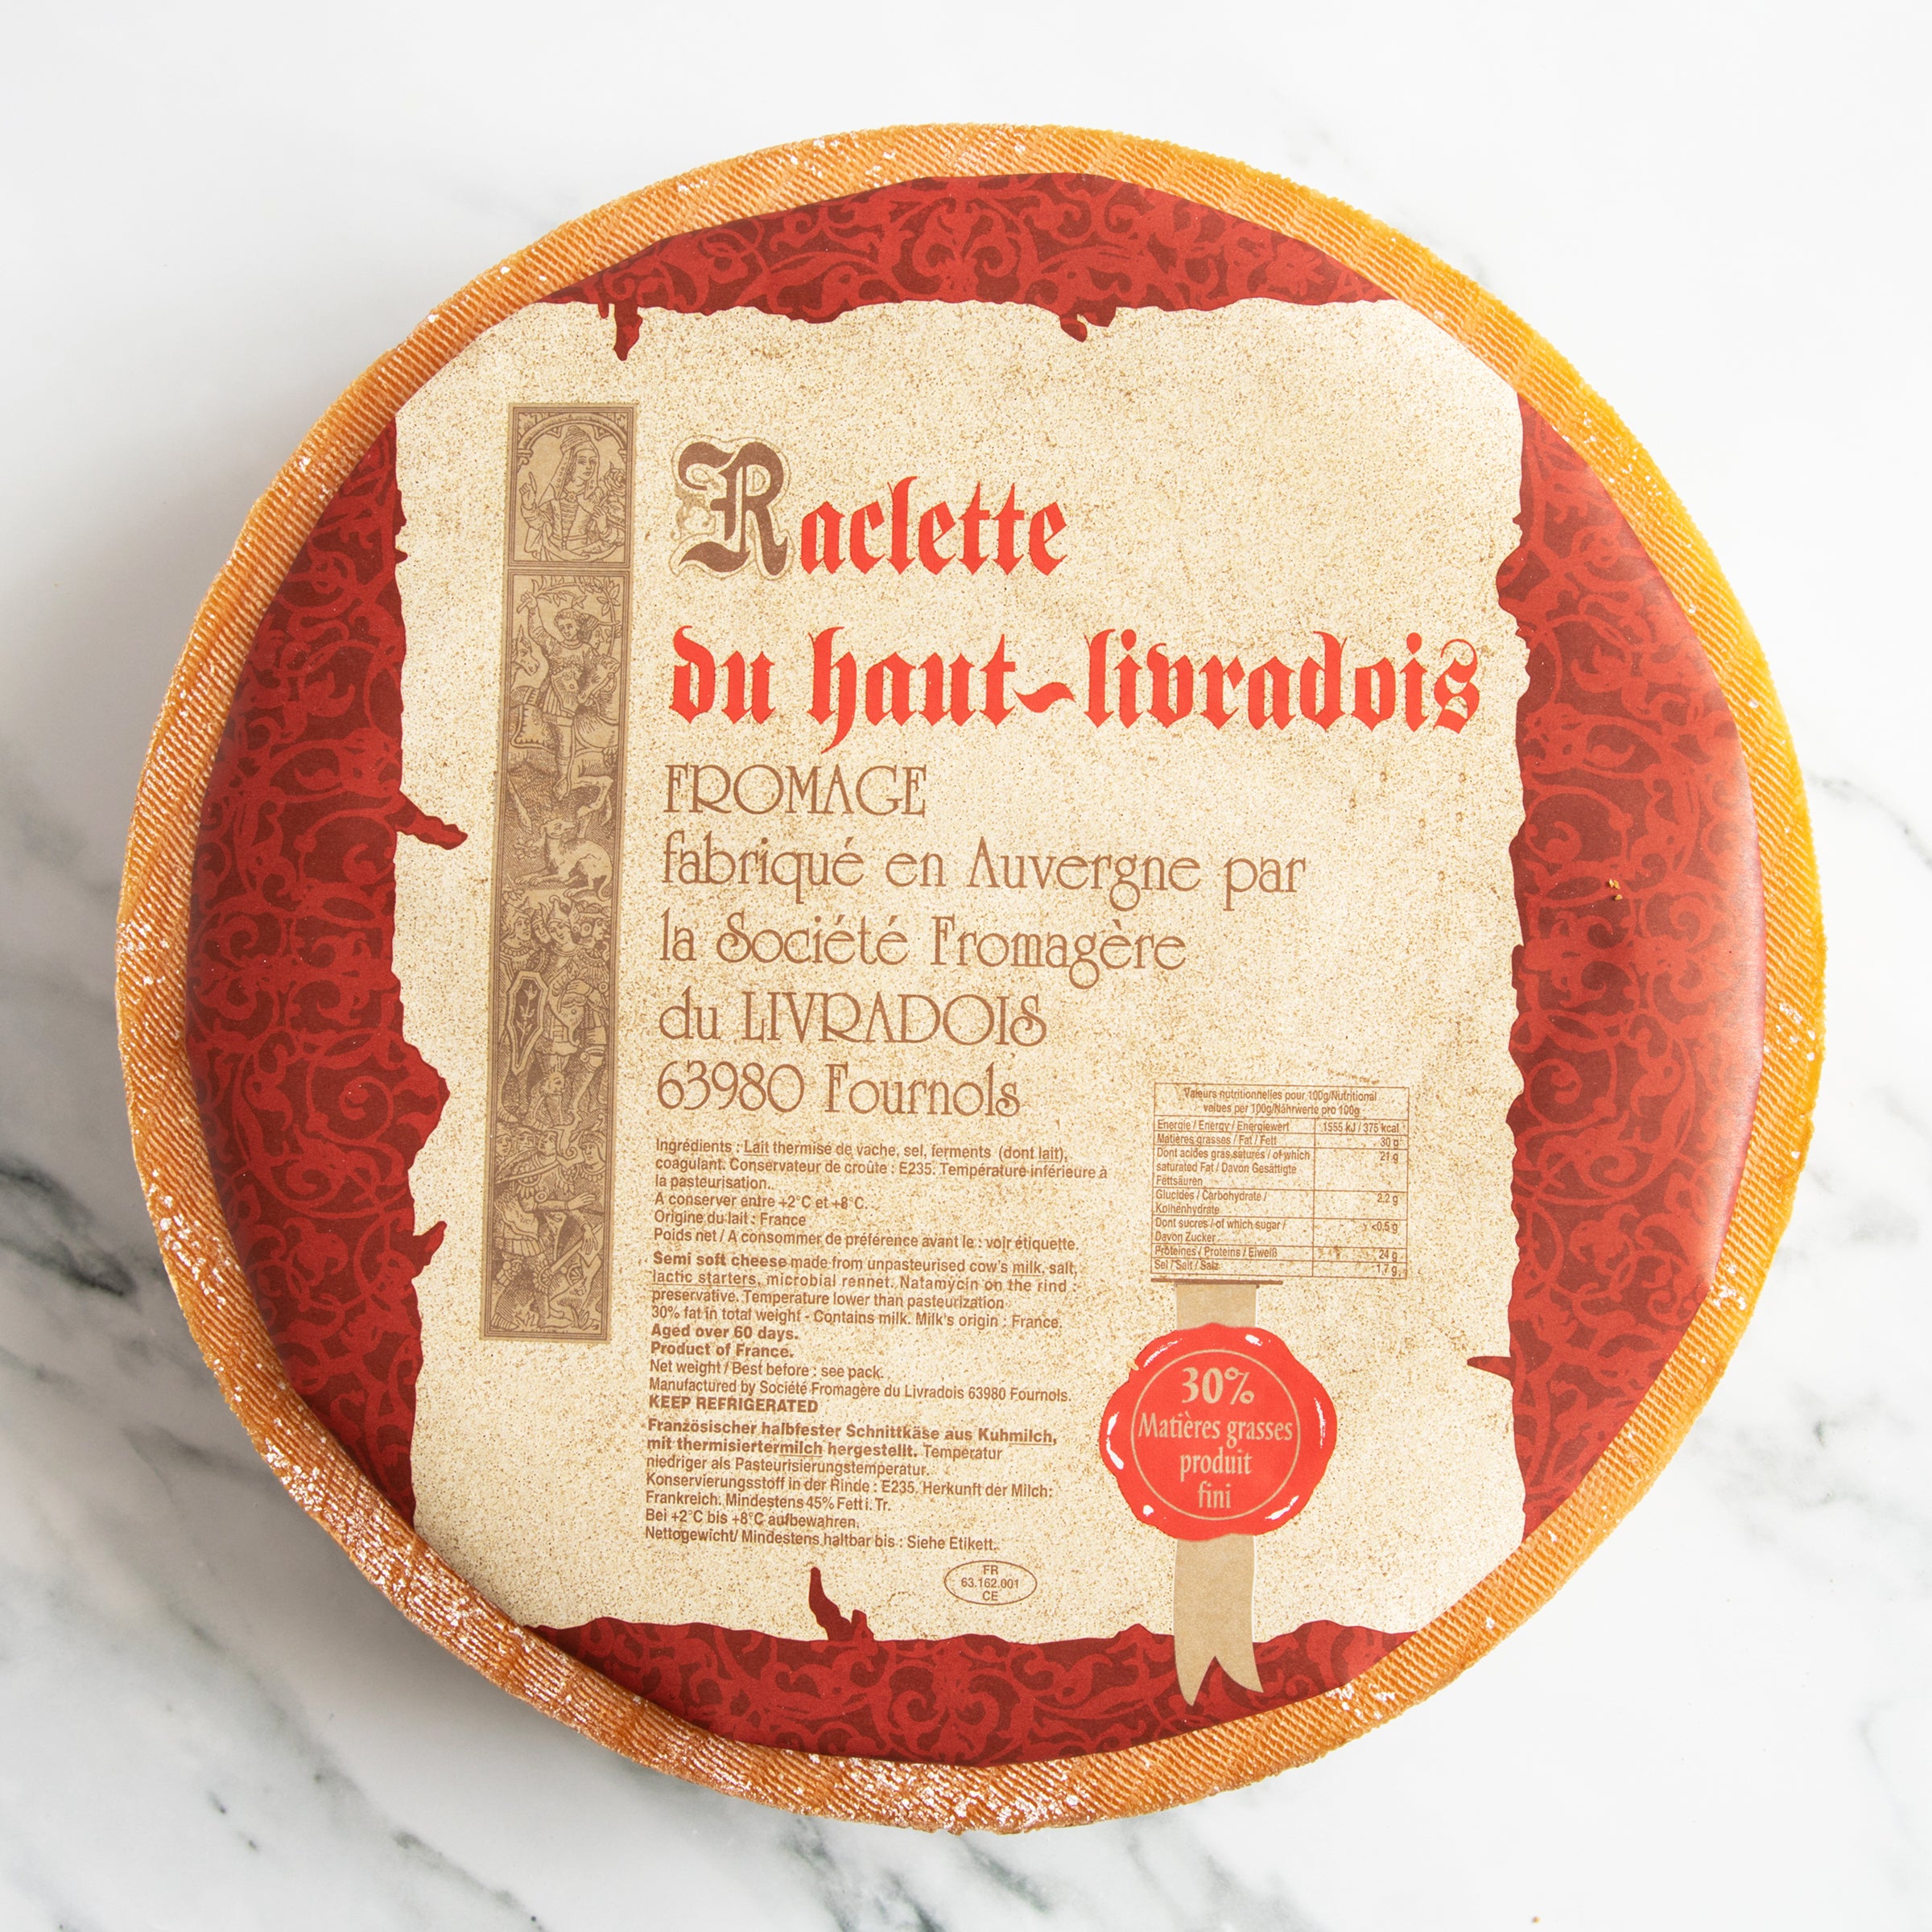 Kit raclette basque 100% fromage, Fromagerie Basque